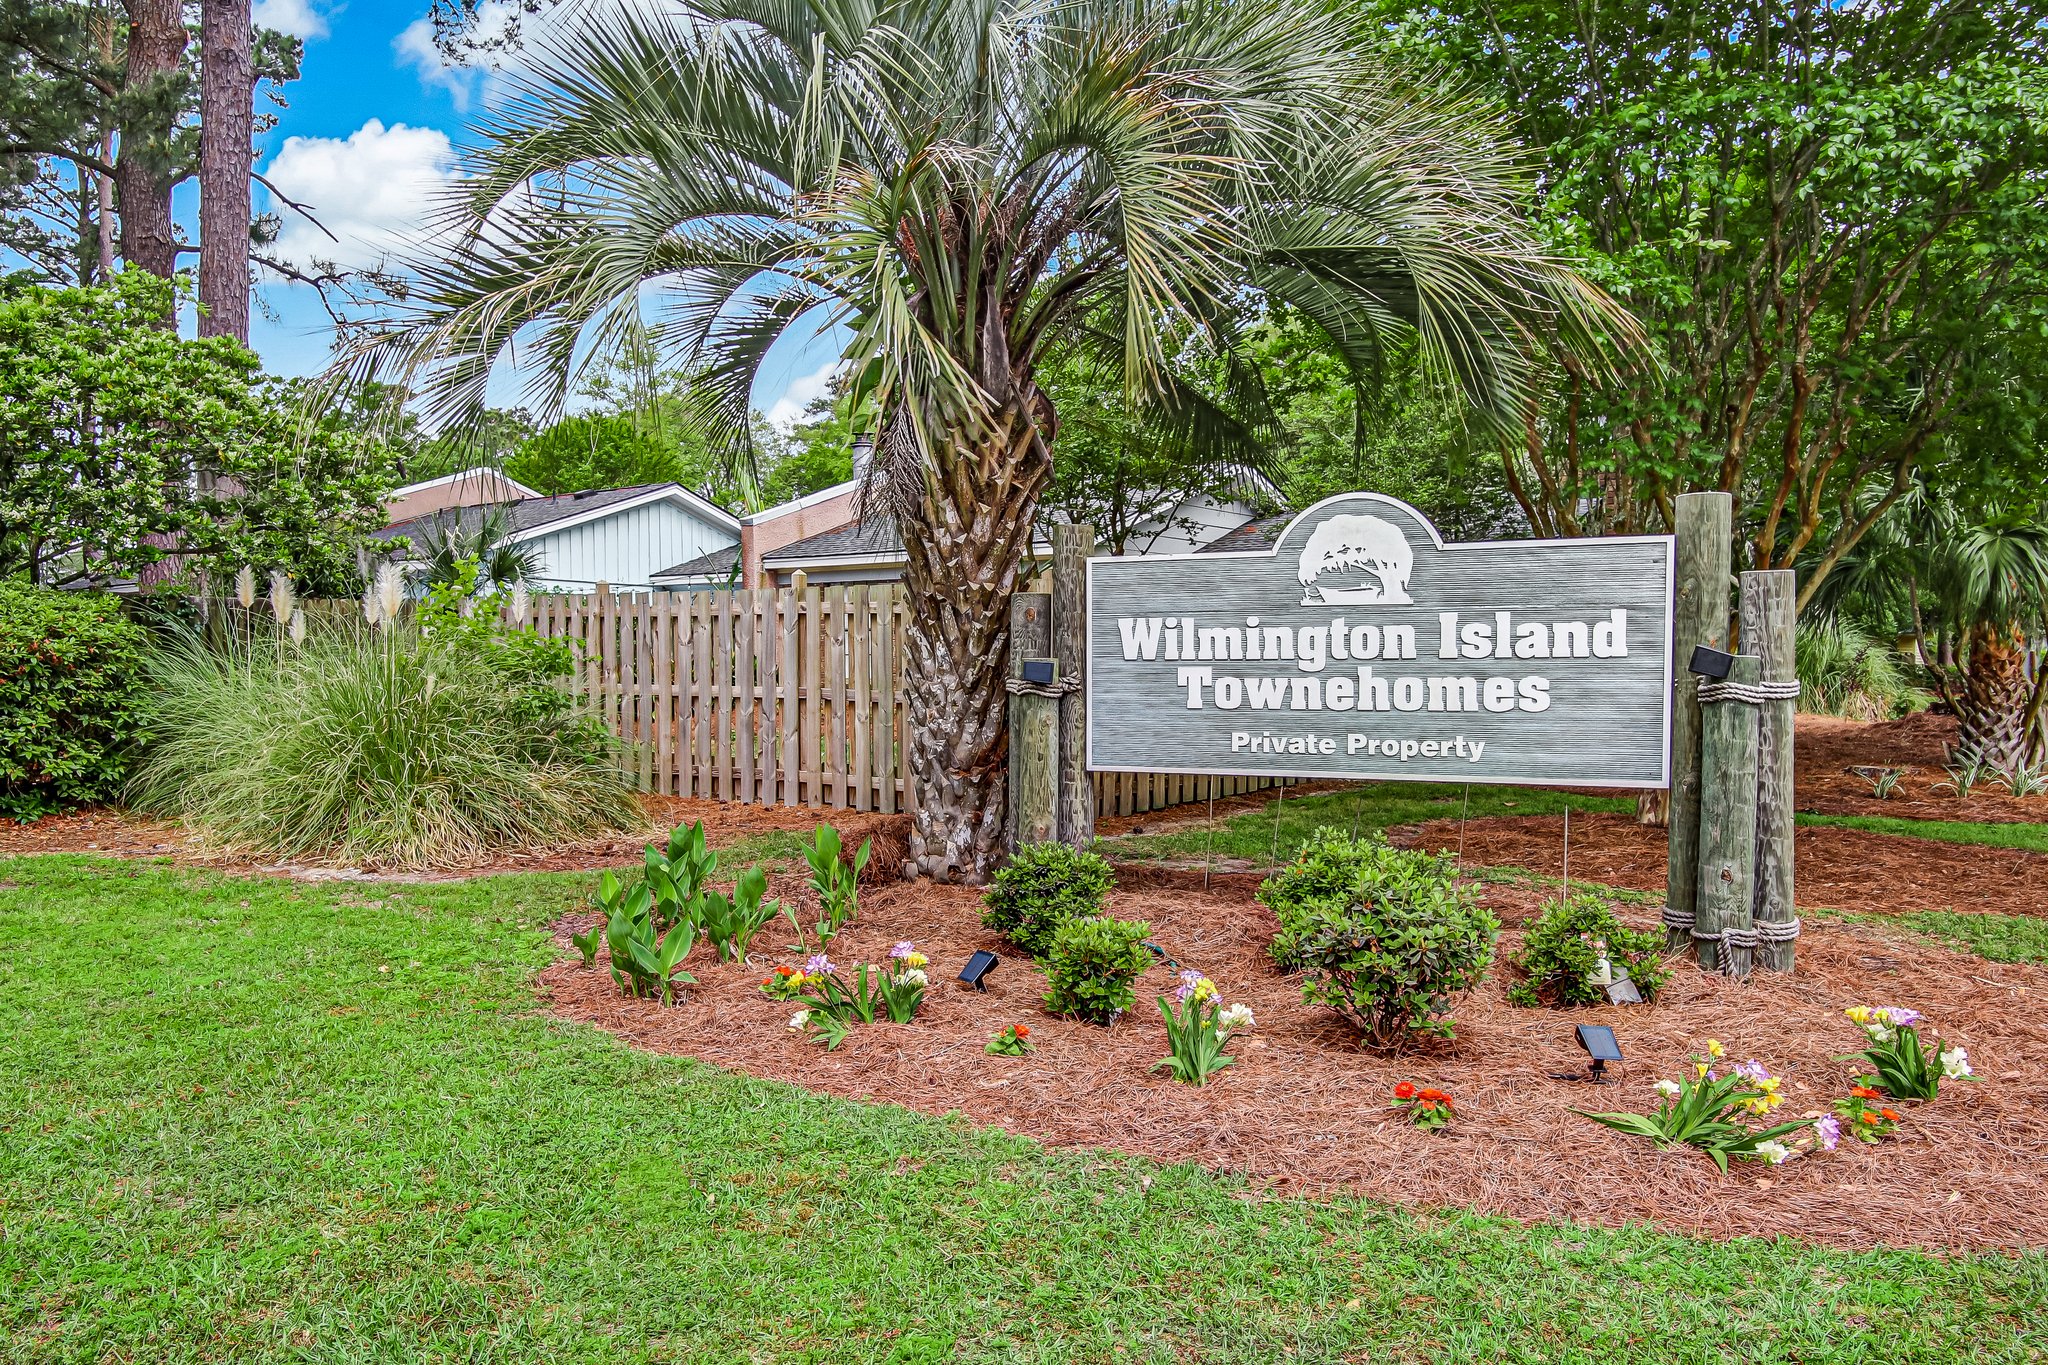 Wilmington Island Townehomes